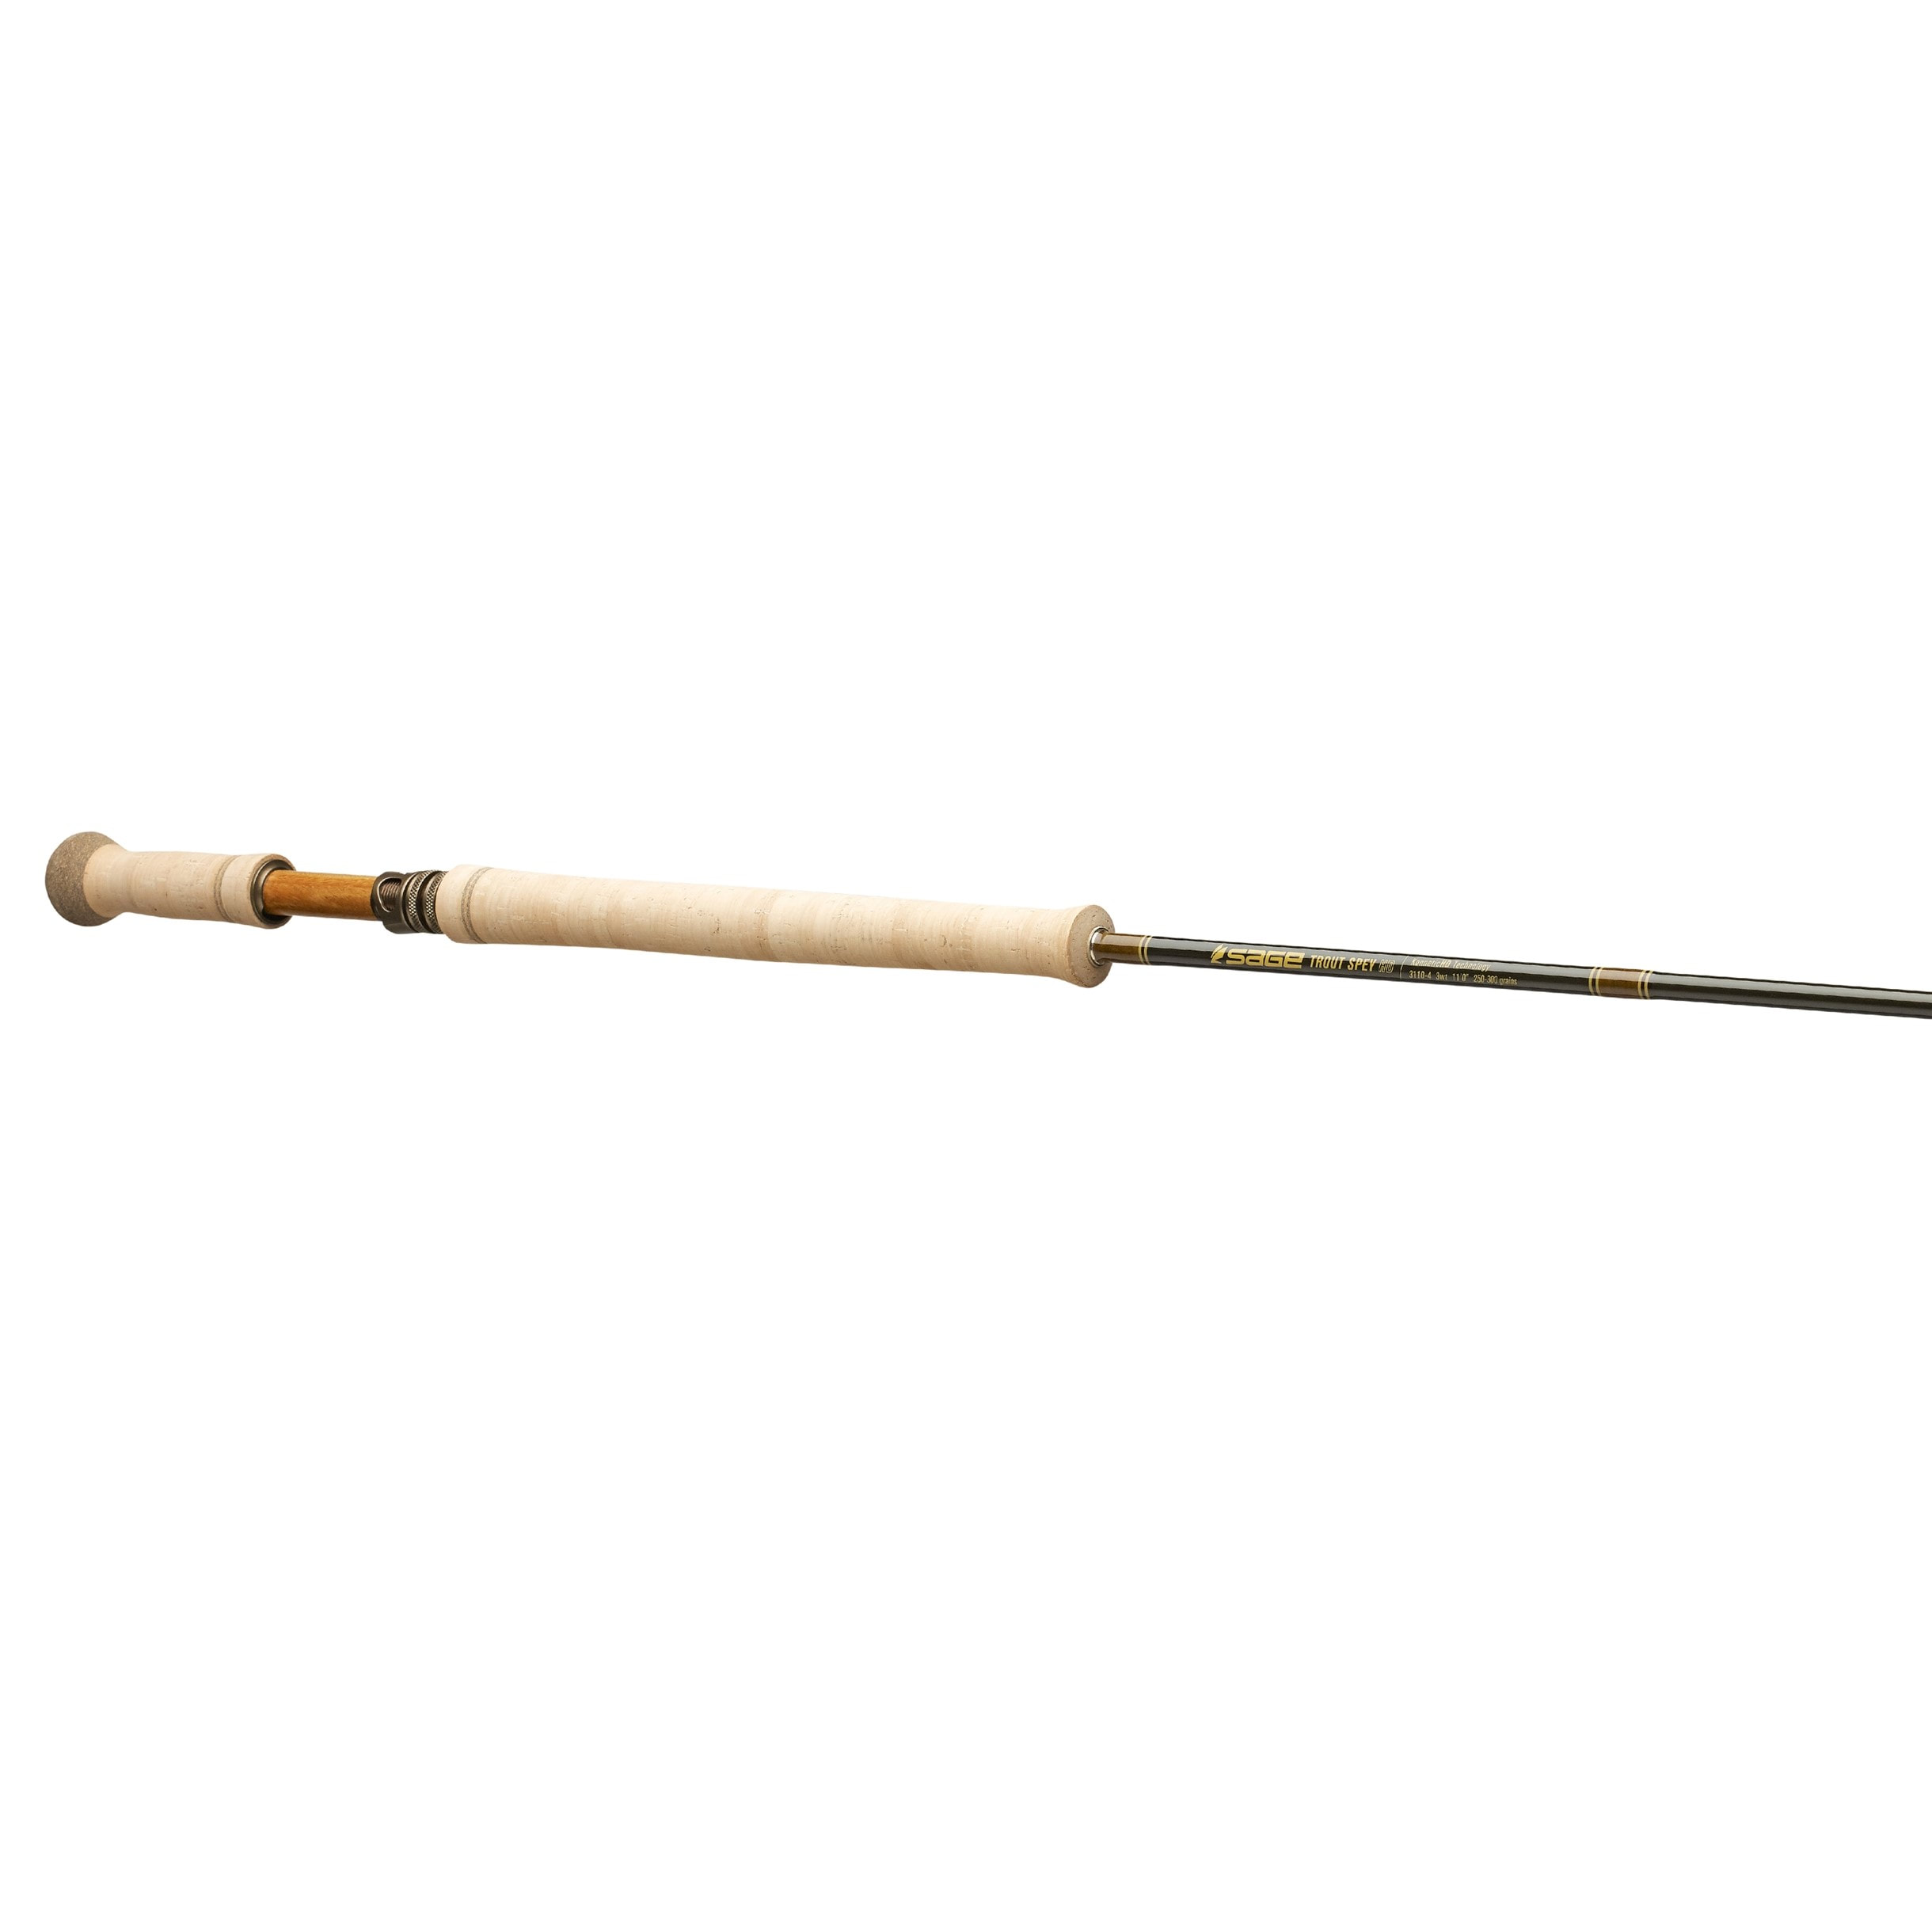 Trout Rods, Trout Spinning Rods